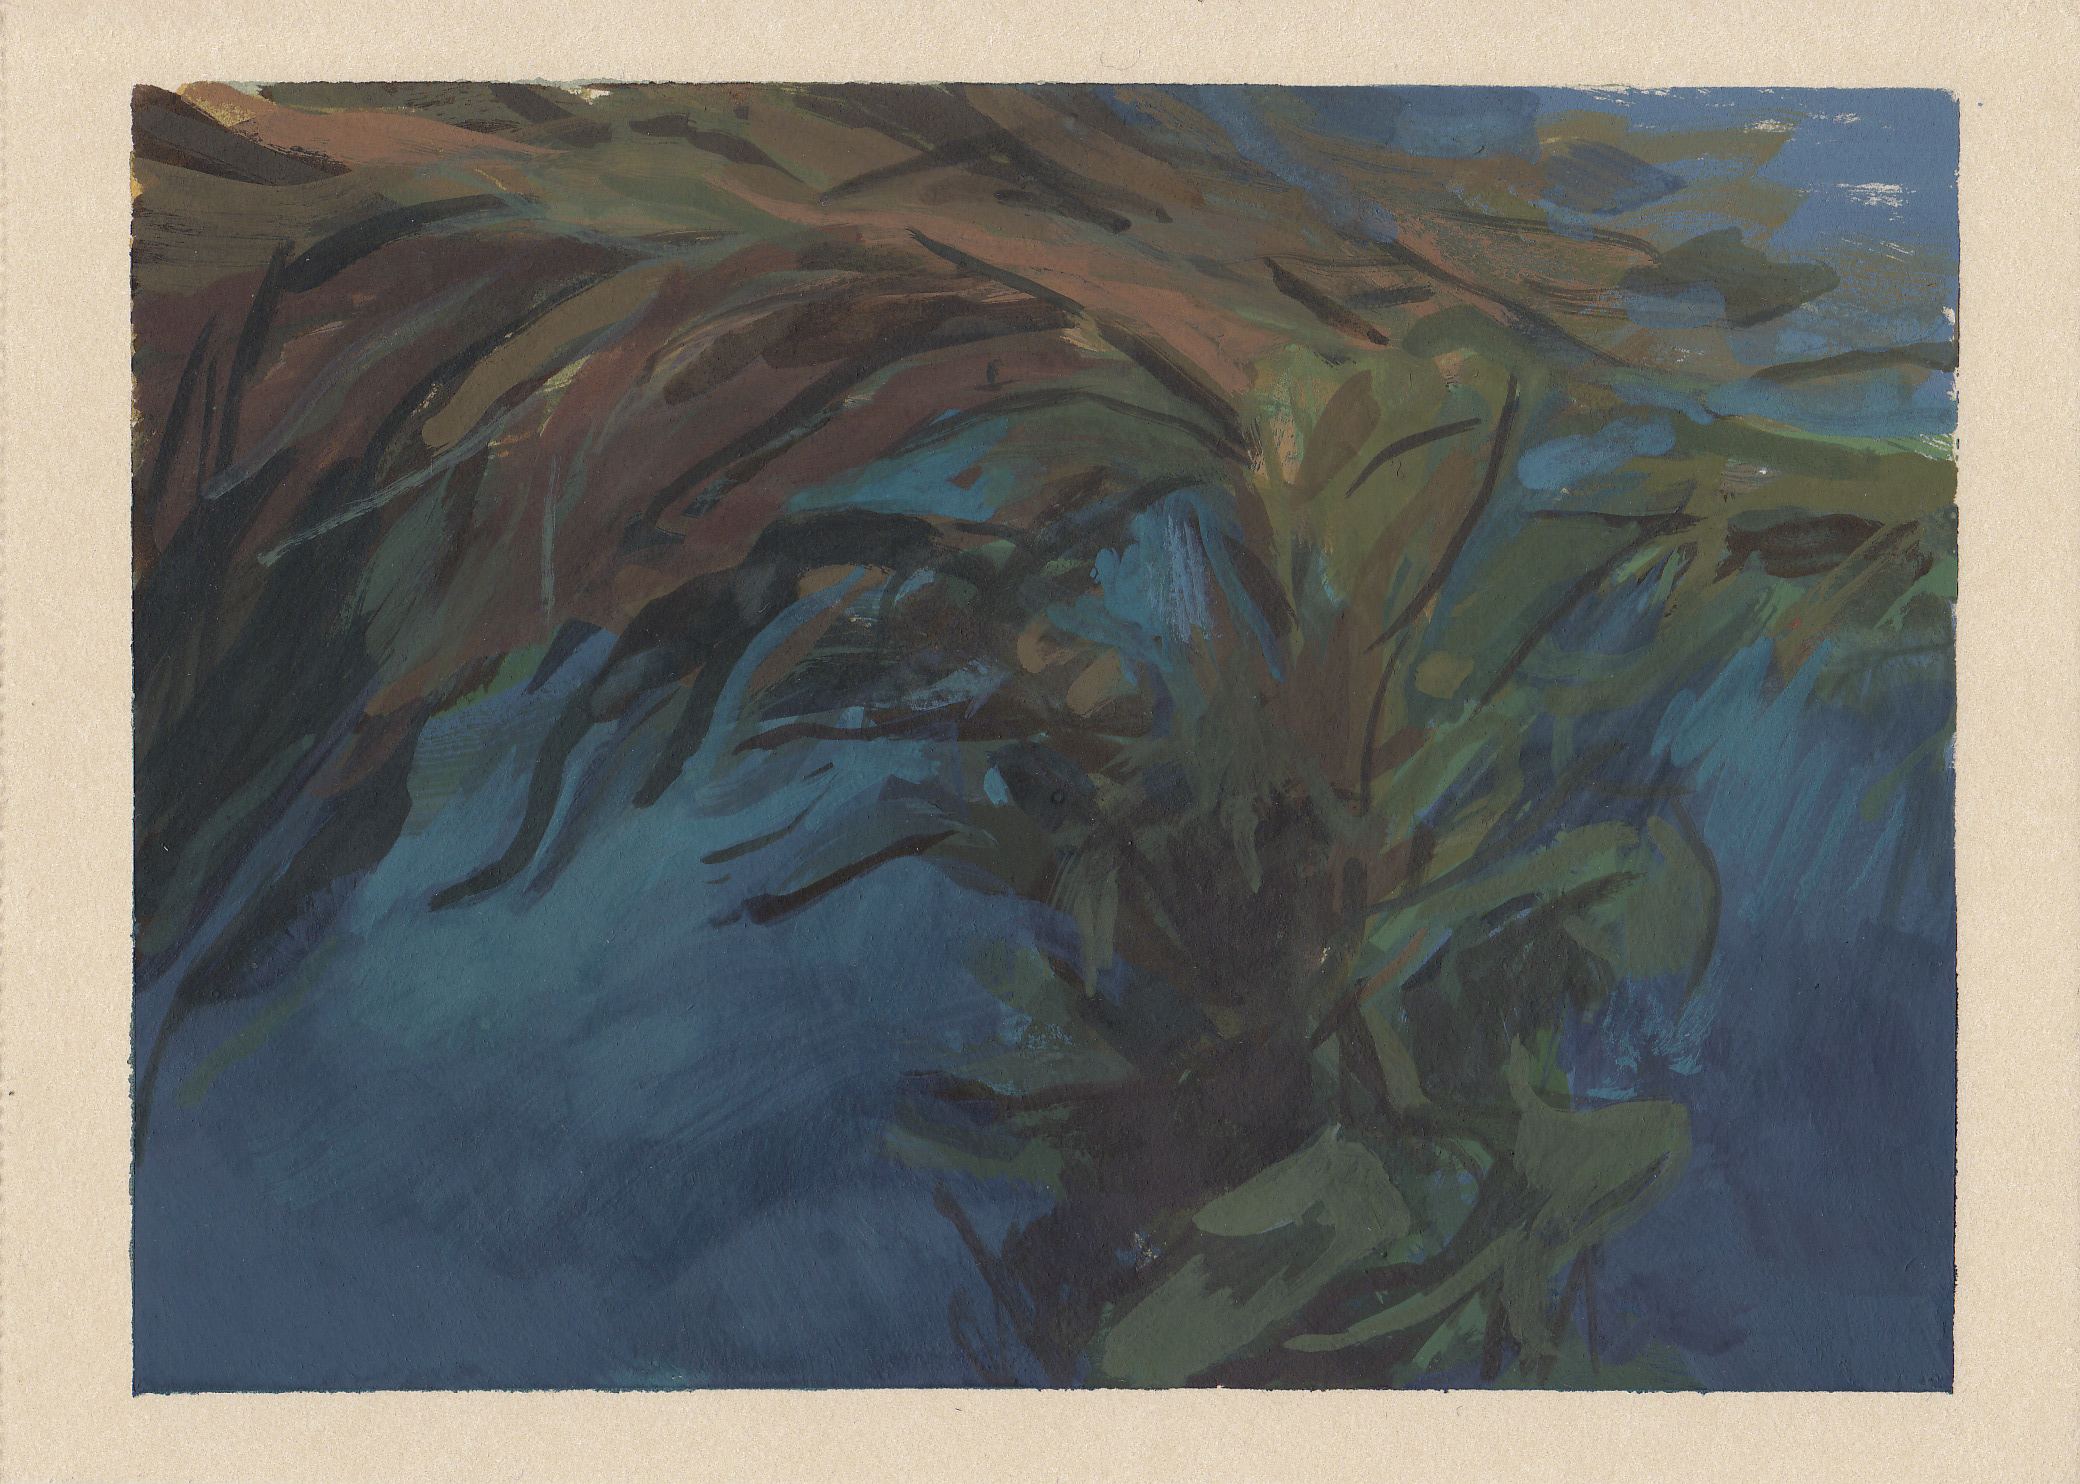    Kelp Forest     gouache on paper 4.25x6" 2013  private collection Australia  purchase prints  